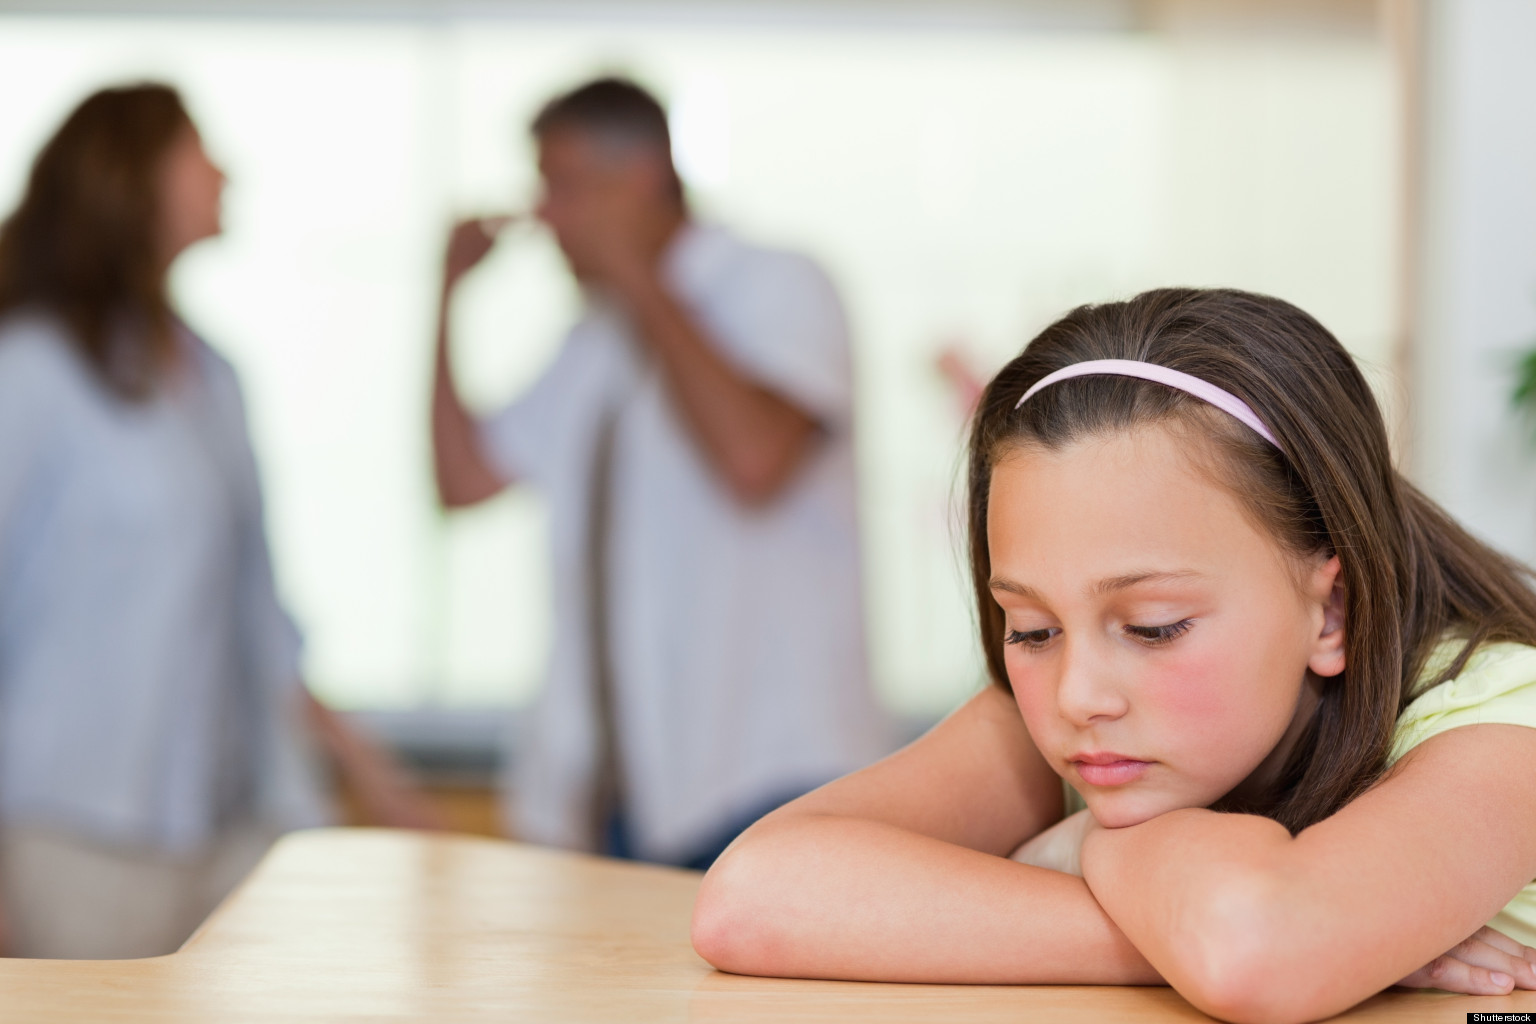 Fighting In Front Of Kids Arguments Between Mom And Dad Can Affect ... image pic